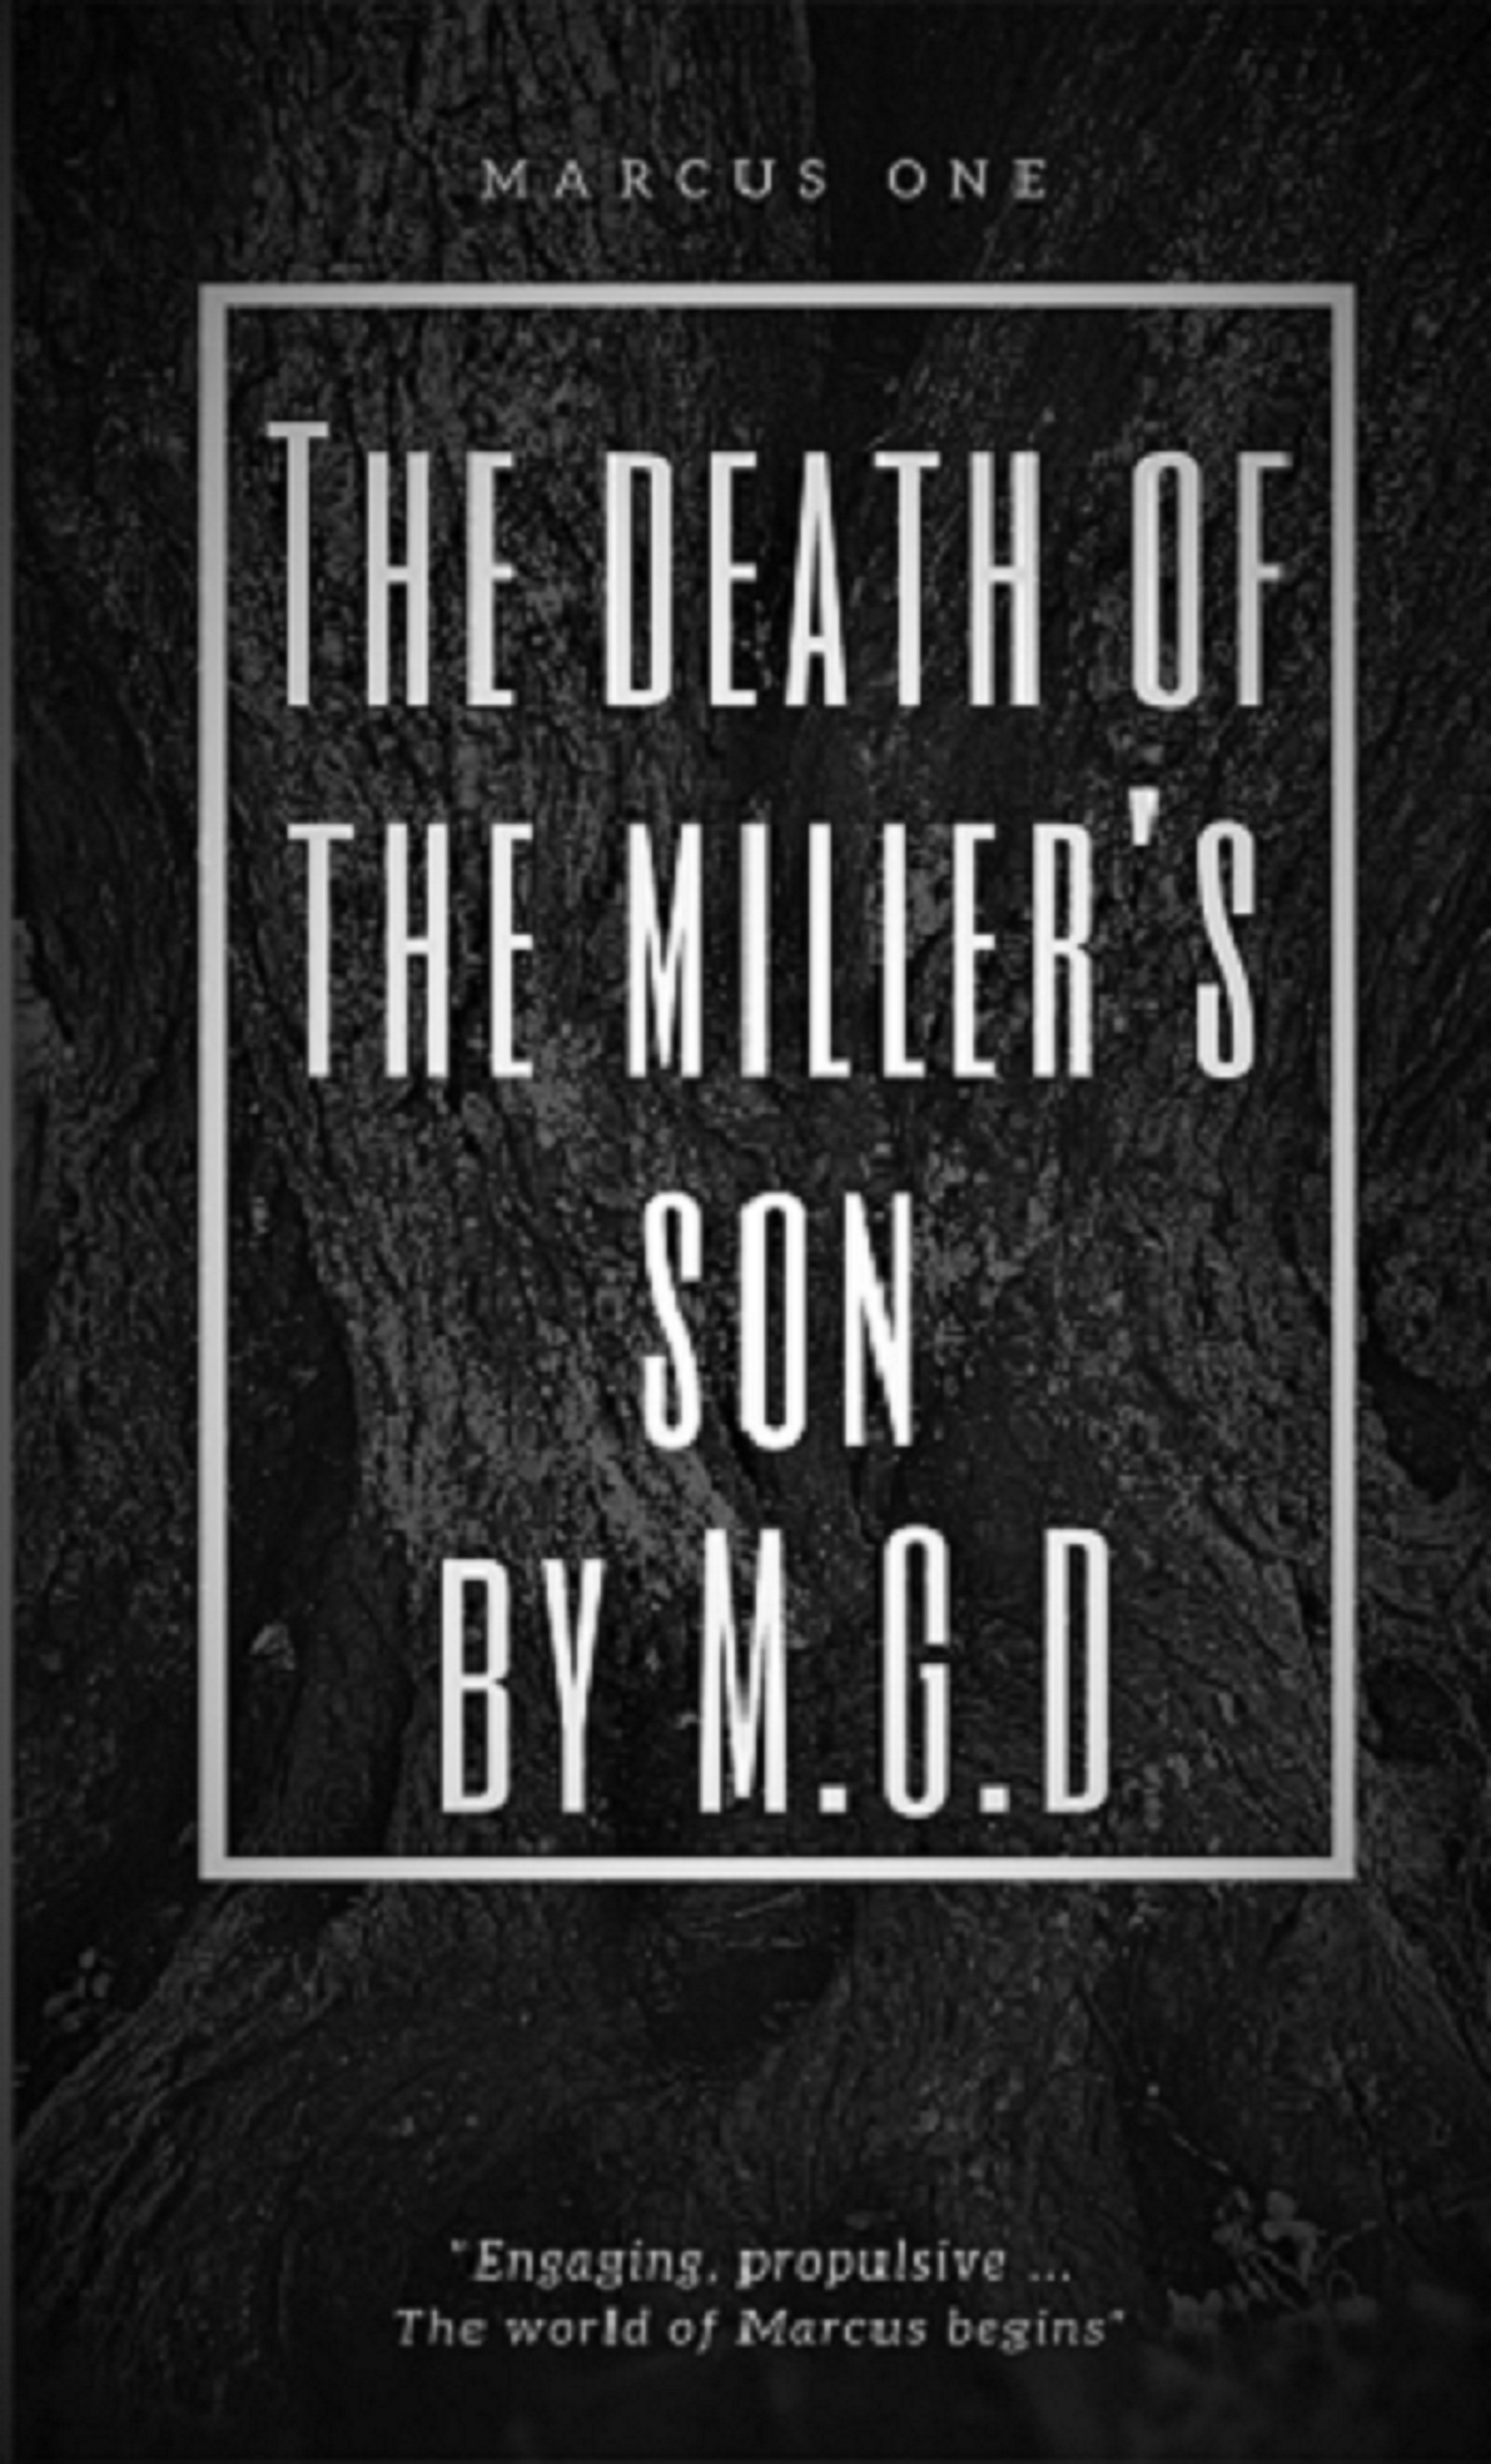 FREE: The Death of the Miller’s Son by MGD